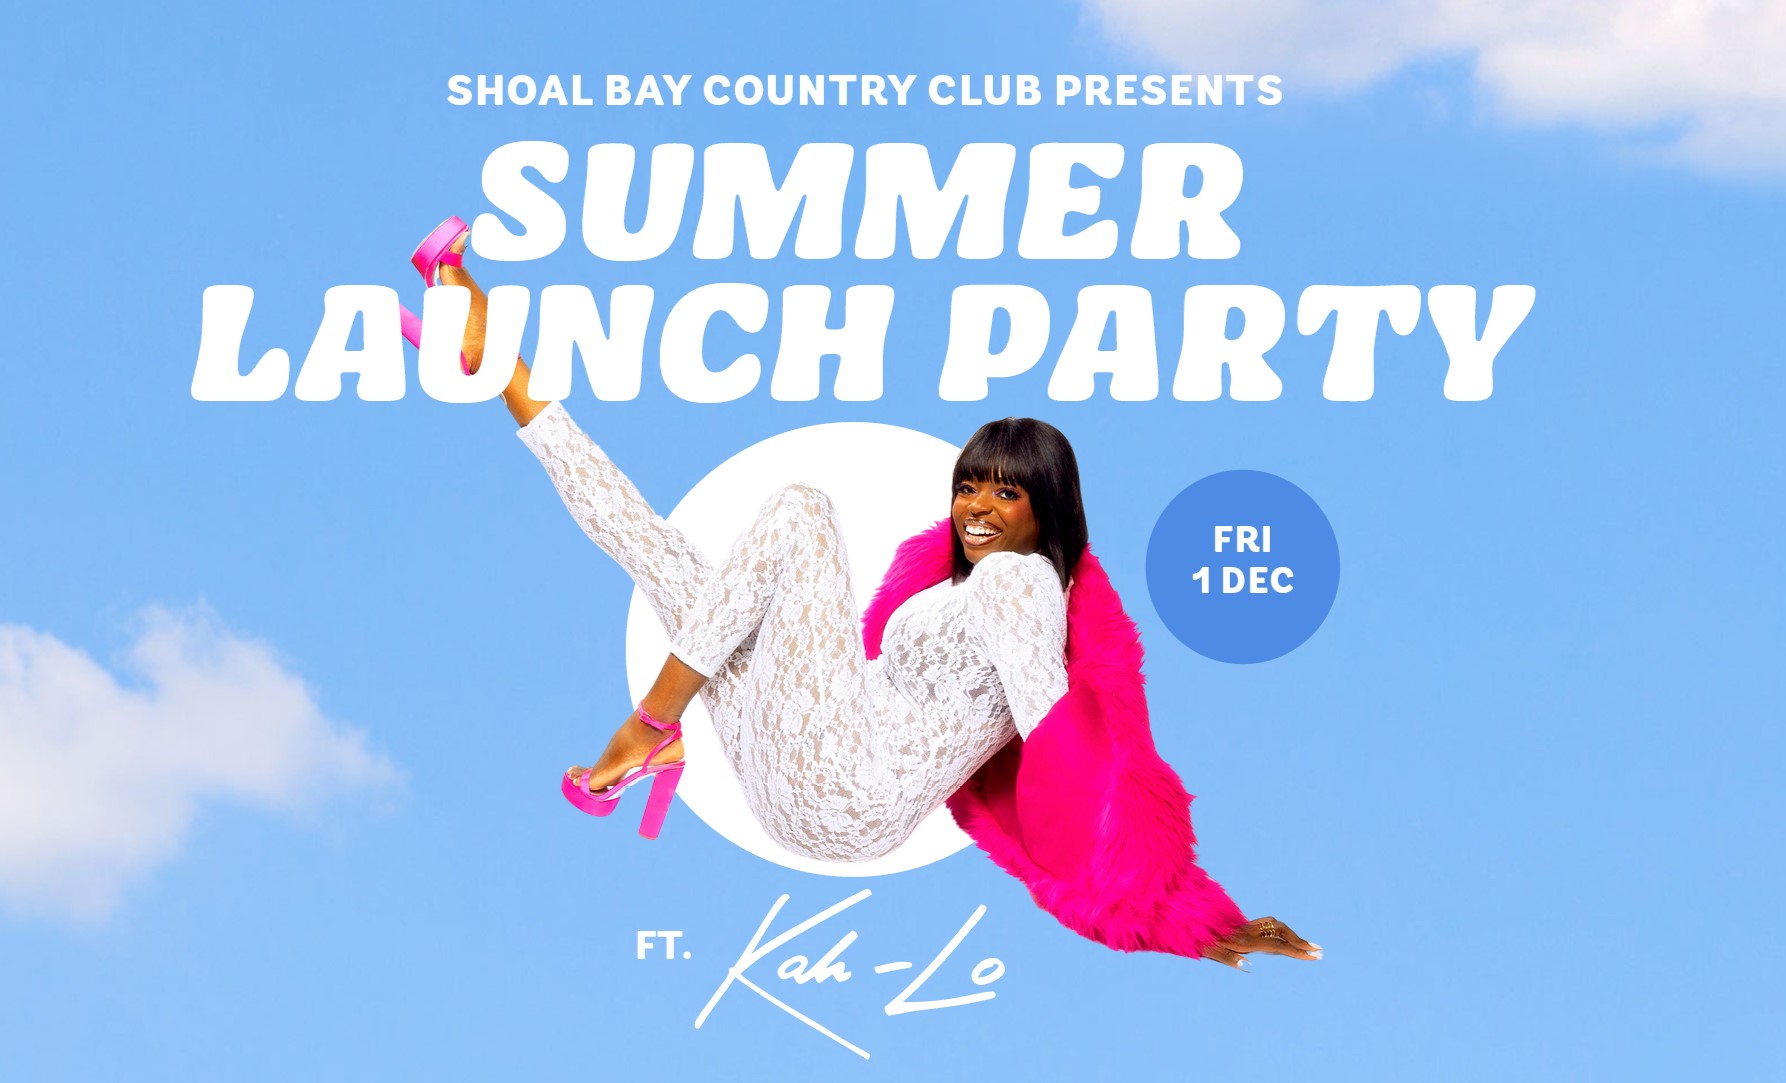 Summer Launch Party Ft. KahLo at Shoal Bay Country Club Port Stephens